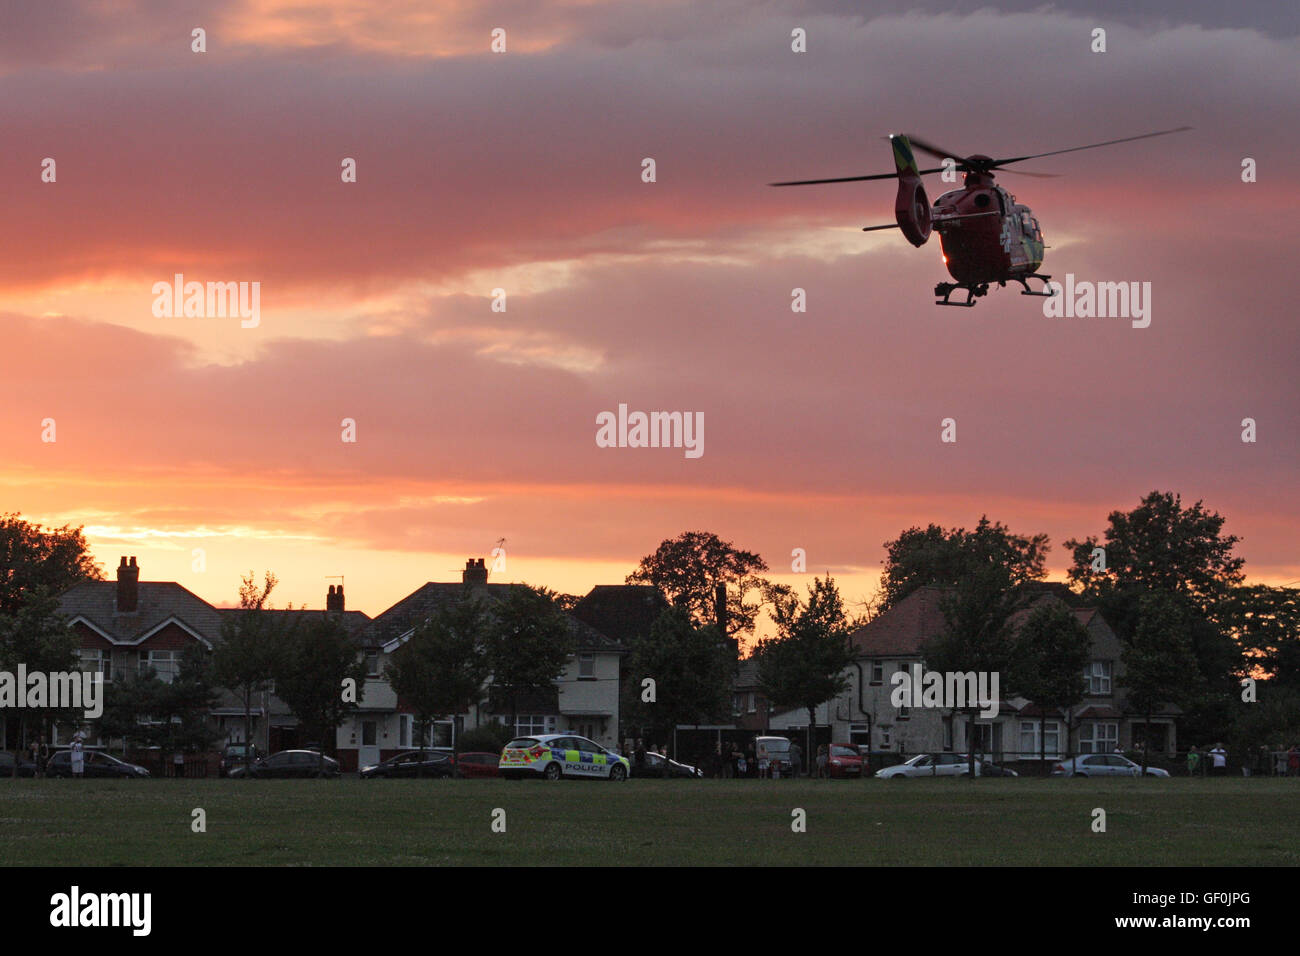 Thames Valley Air Ambulance taking off into sunset Stock Photo